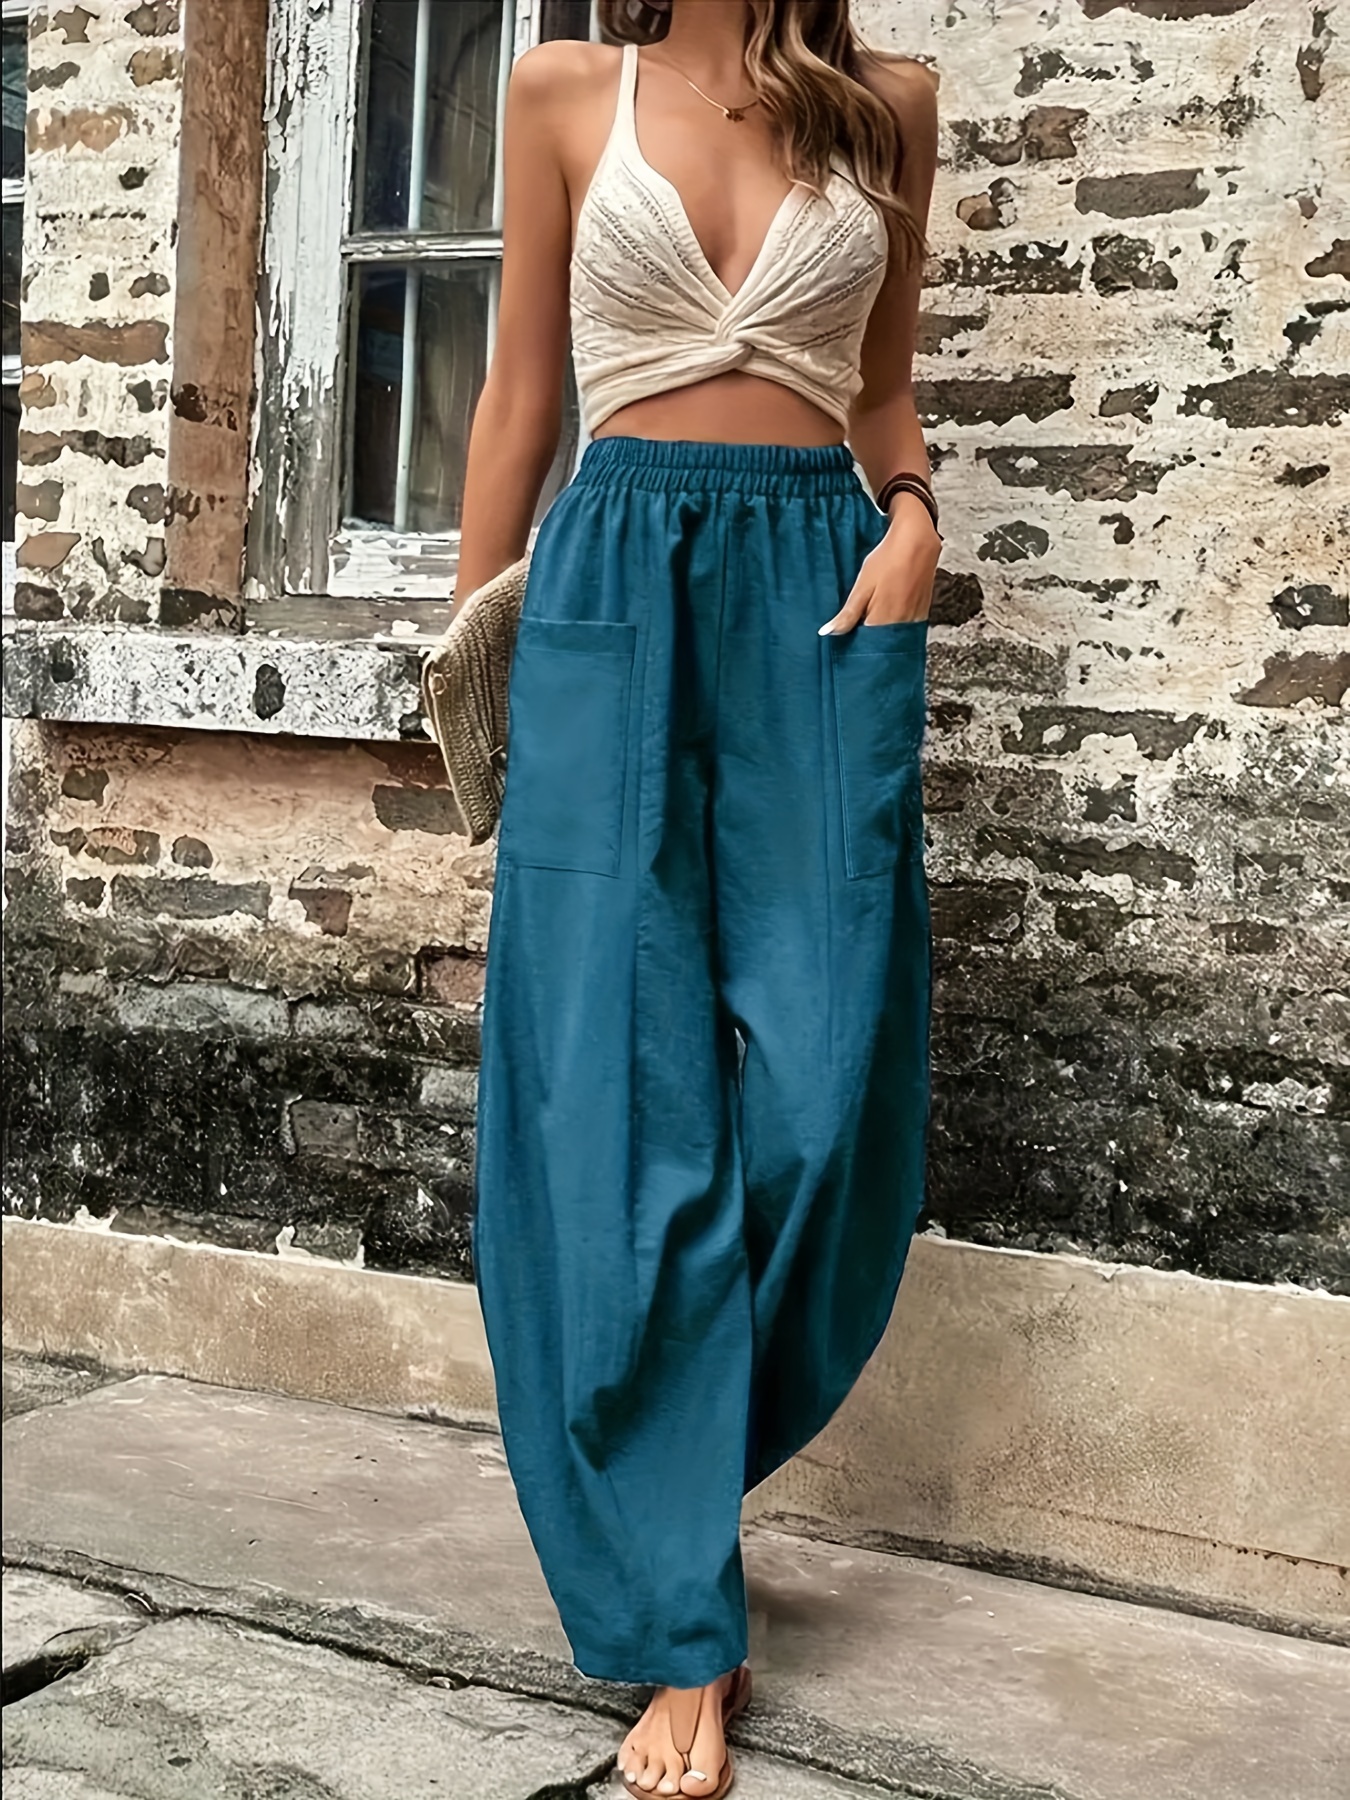 Buy Women Cotton Linen Pants, Casual Solid Boho Pants Wide Leg Pants Summer  Comfy Cropped Harem Trousers with Pockets at